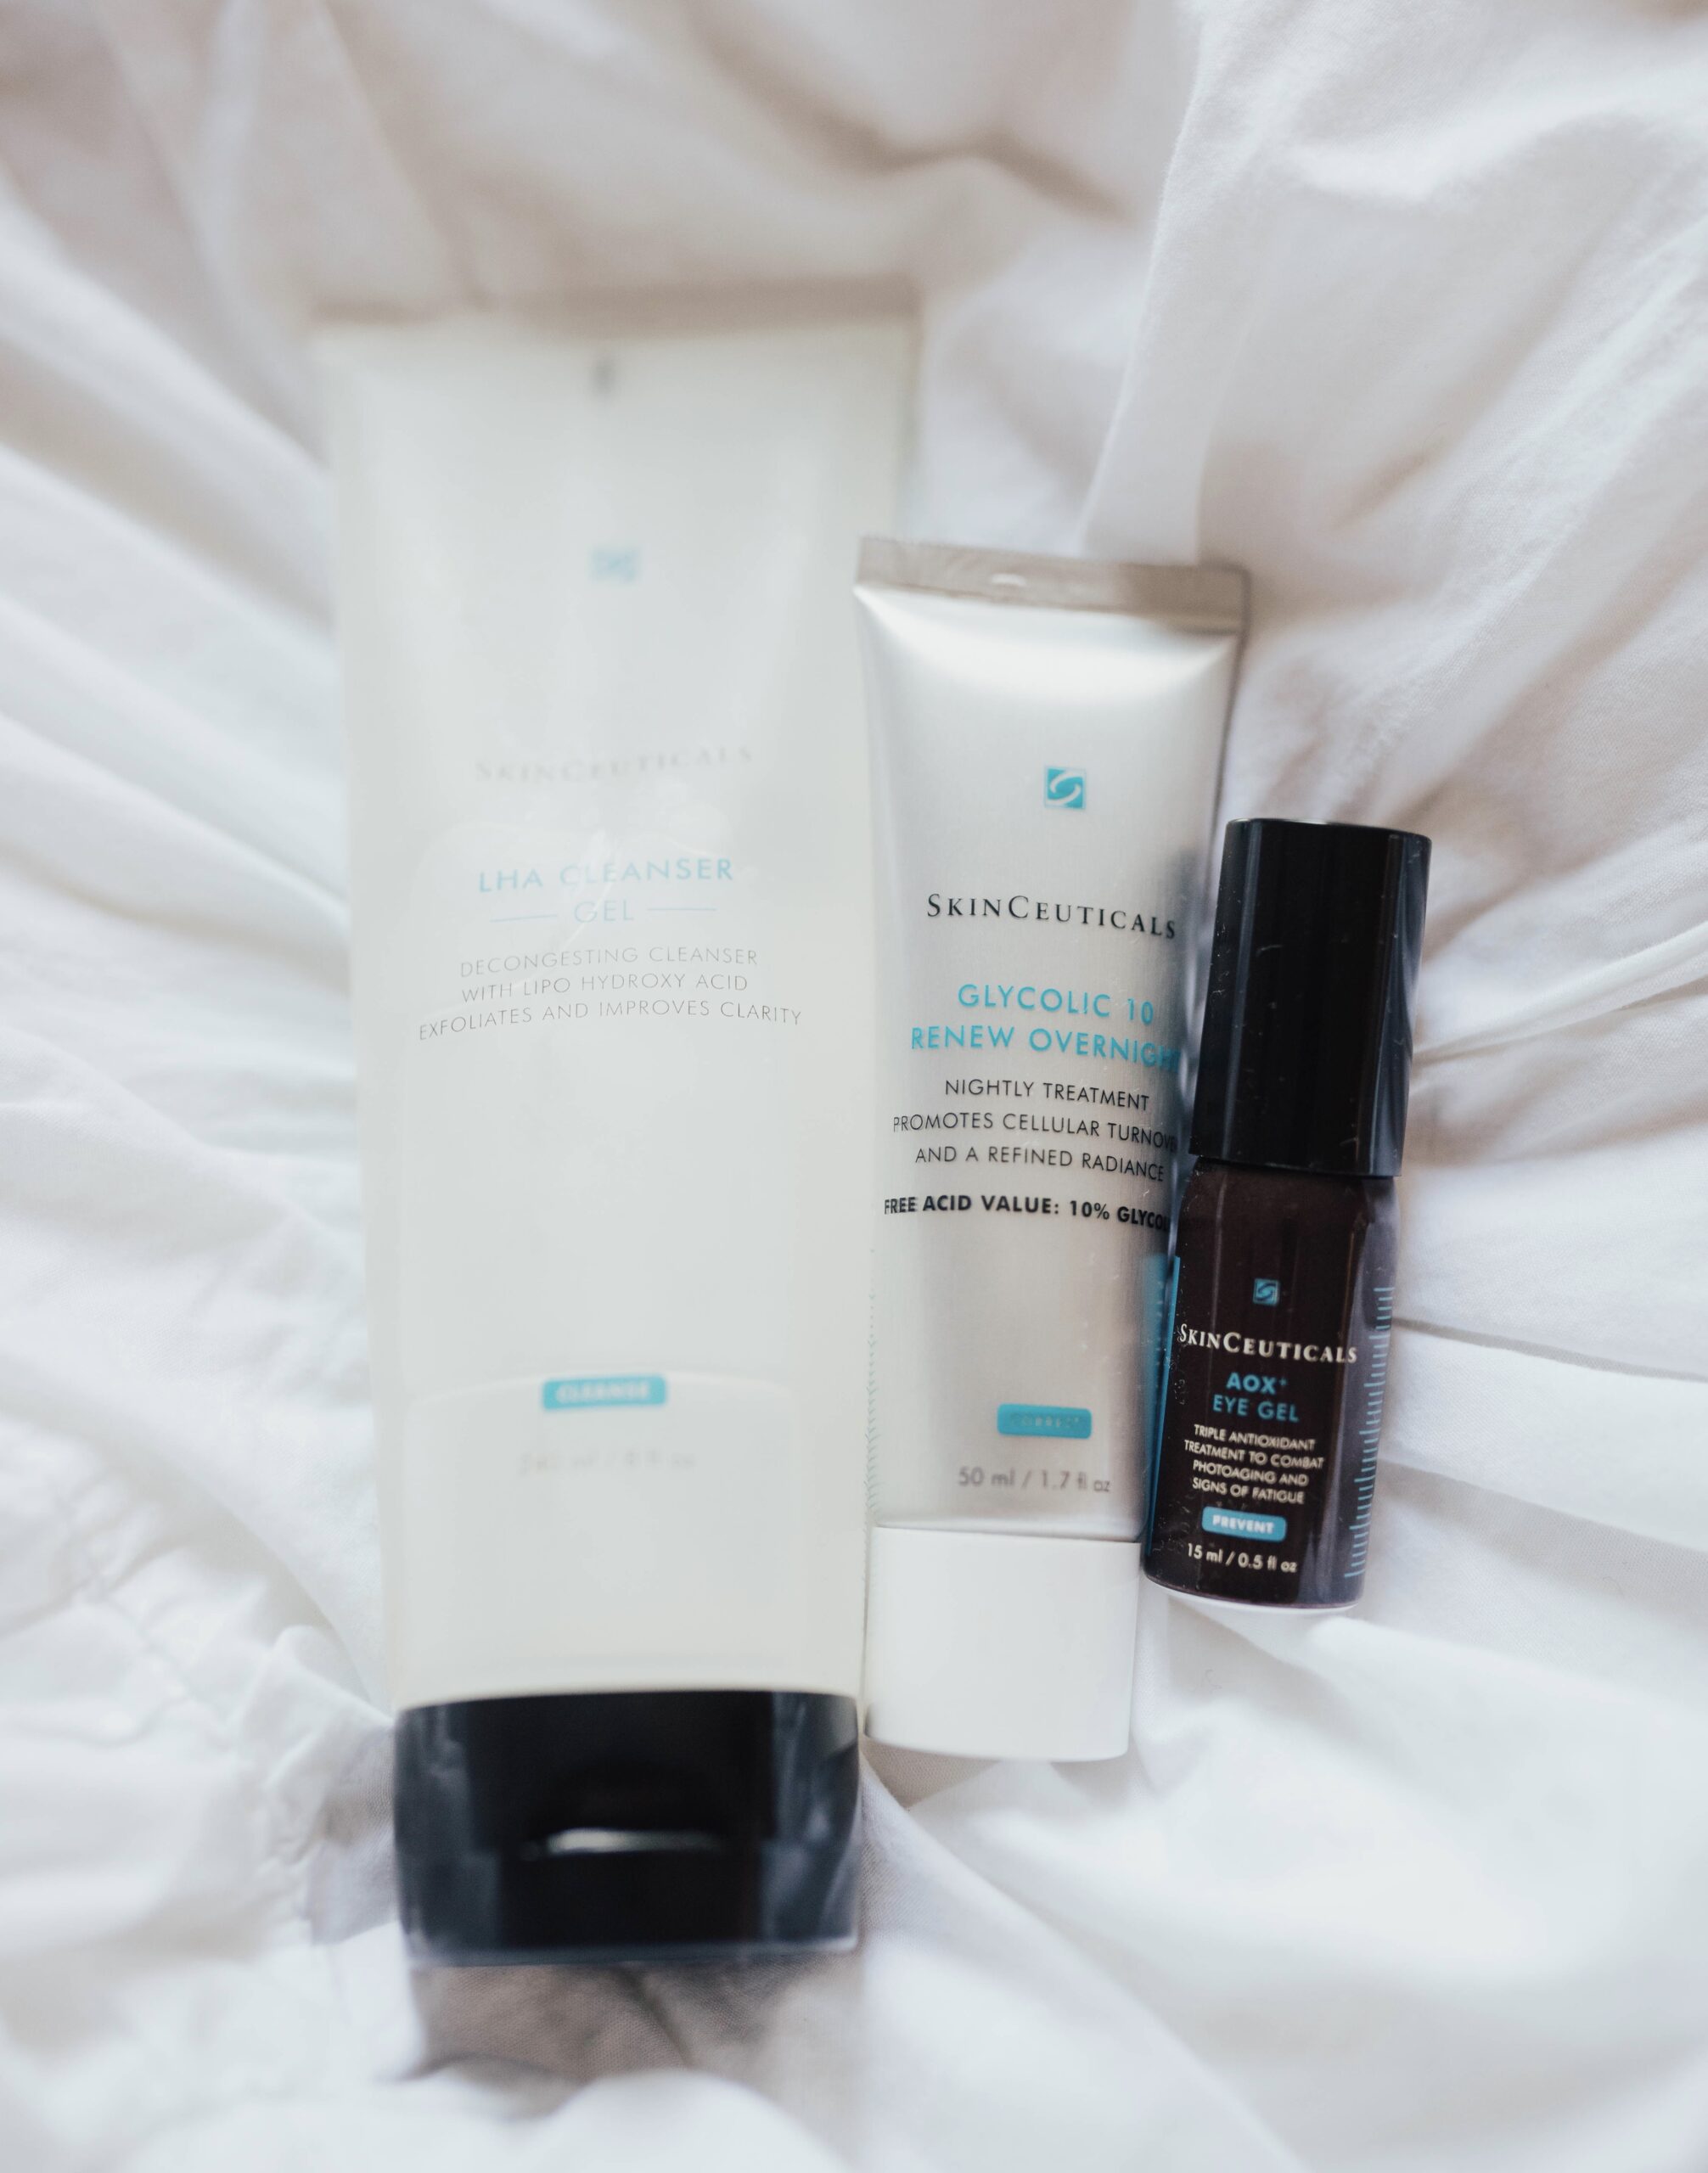 Where to Buy Skinceuticals